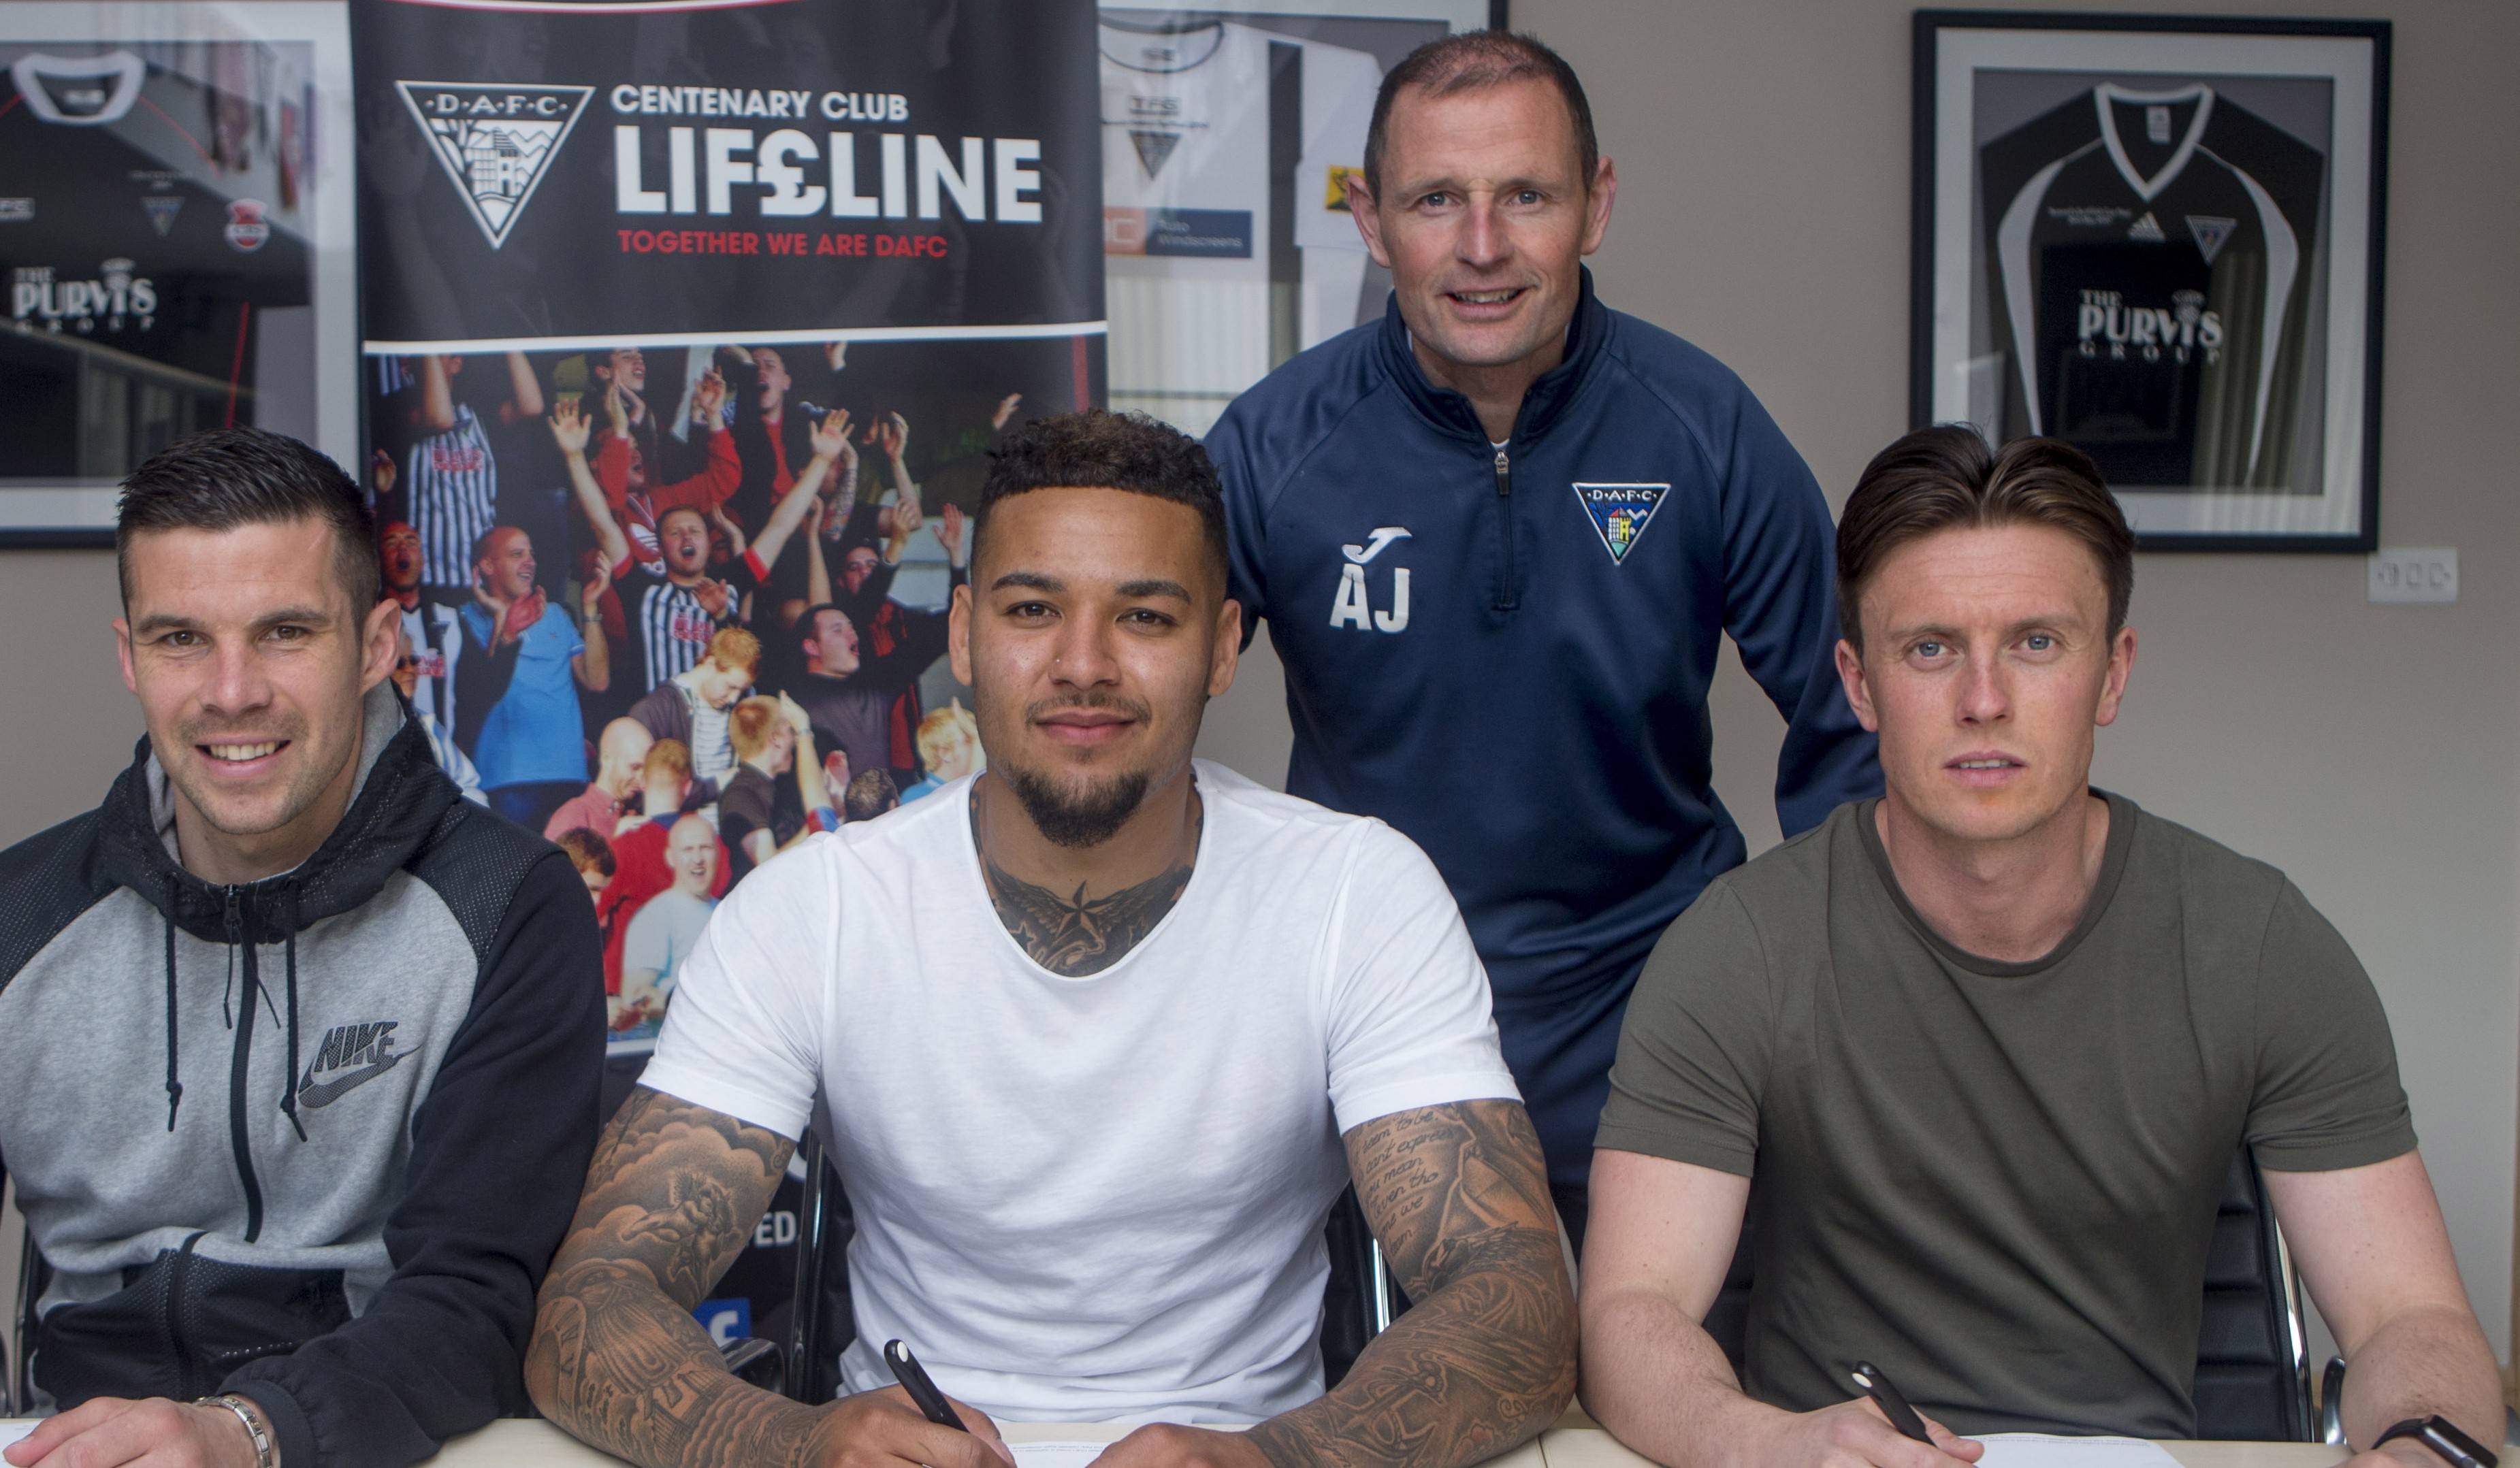 Dunfermline manager Allan Johnston with from left to right, Jason Talbot, Ben Richards-Everton and Joe Cardle.